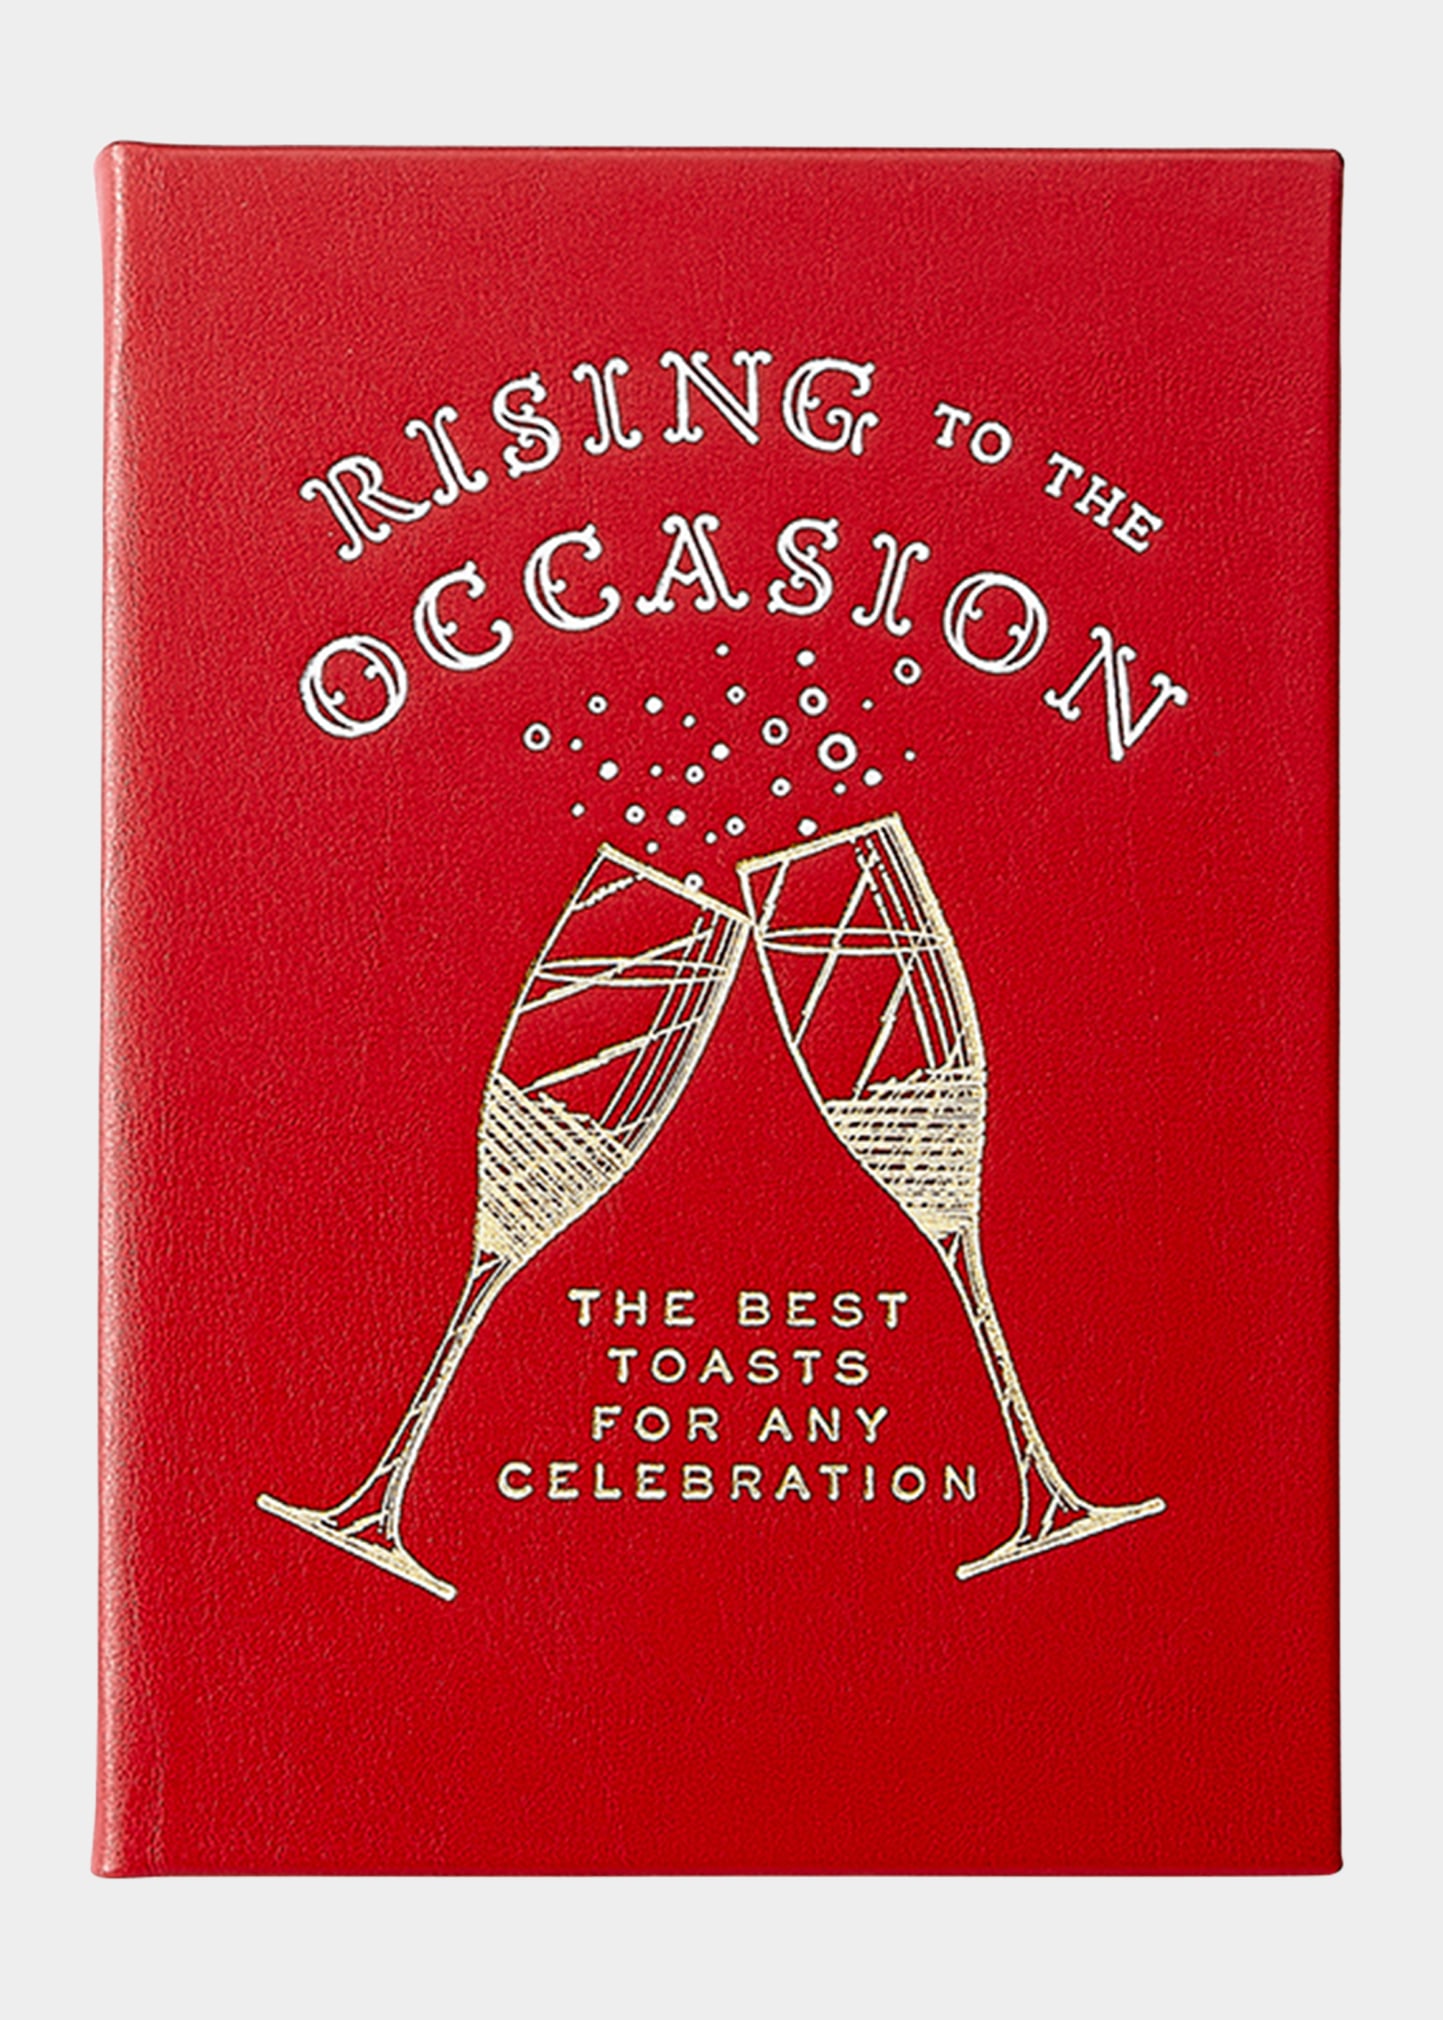 Rising To The Occasion: The Best Toasts For Any Celebration Book by Paul Dickson